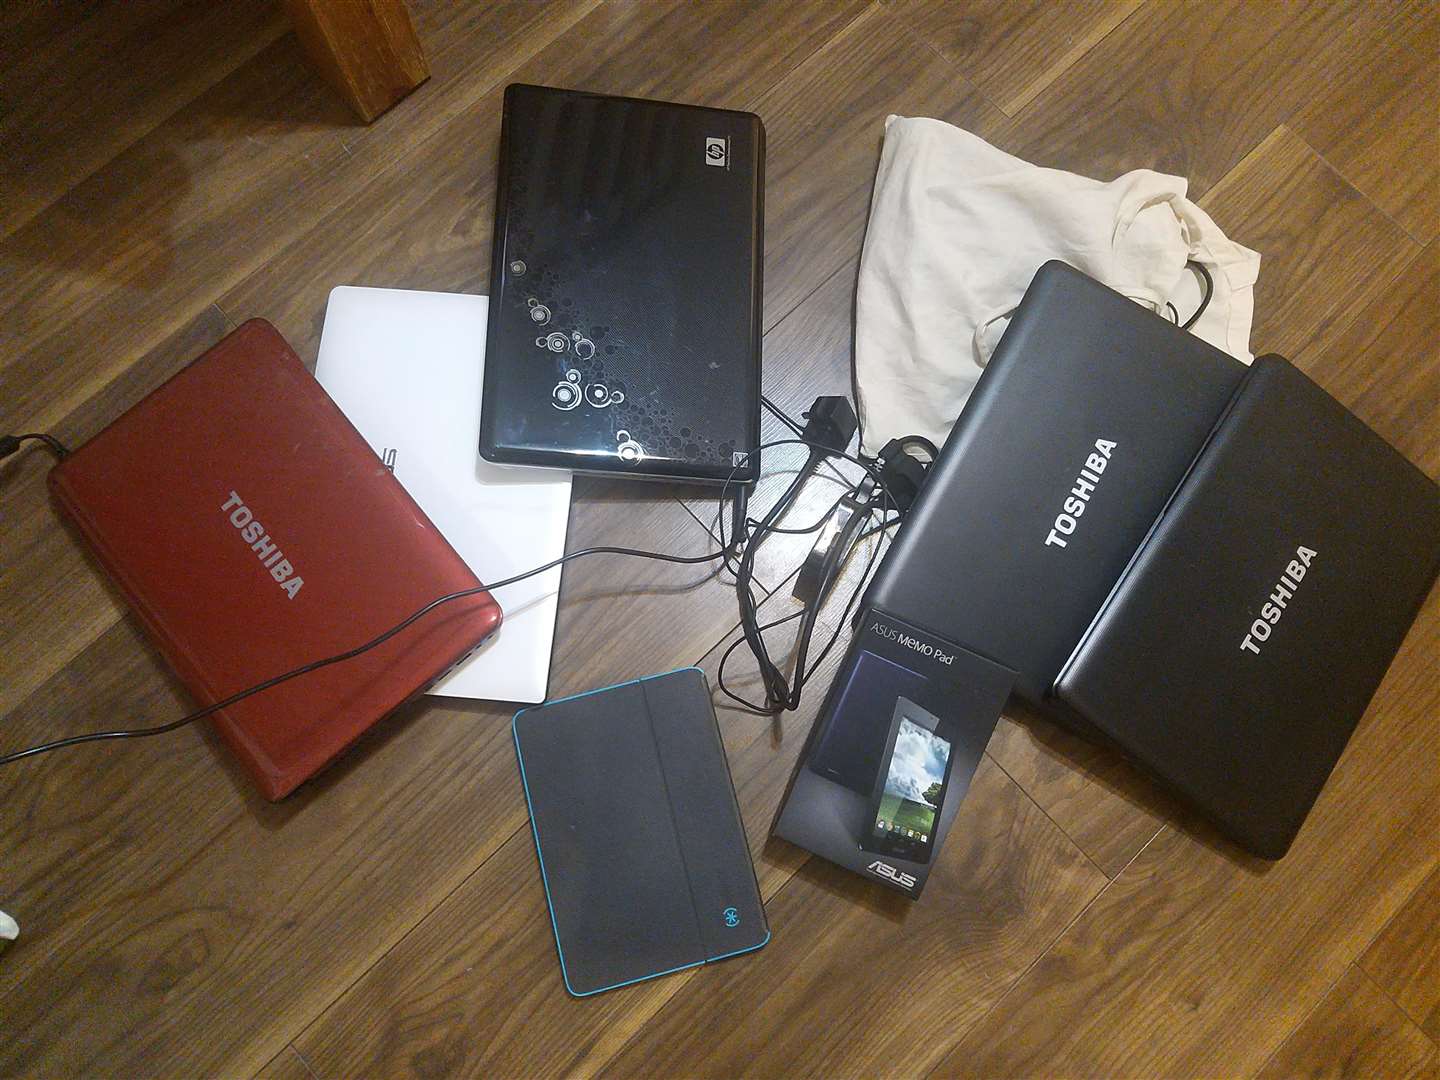 Some of the laptops donated as part of the Dartford Deeds Not Words laptop appeal